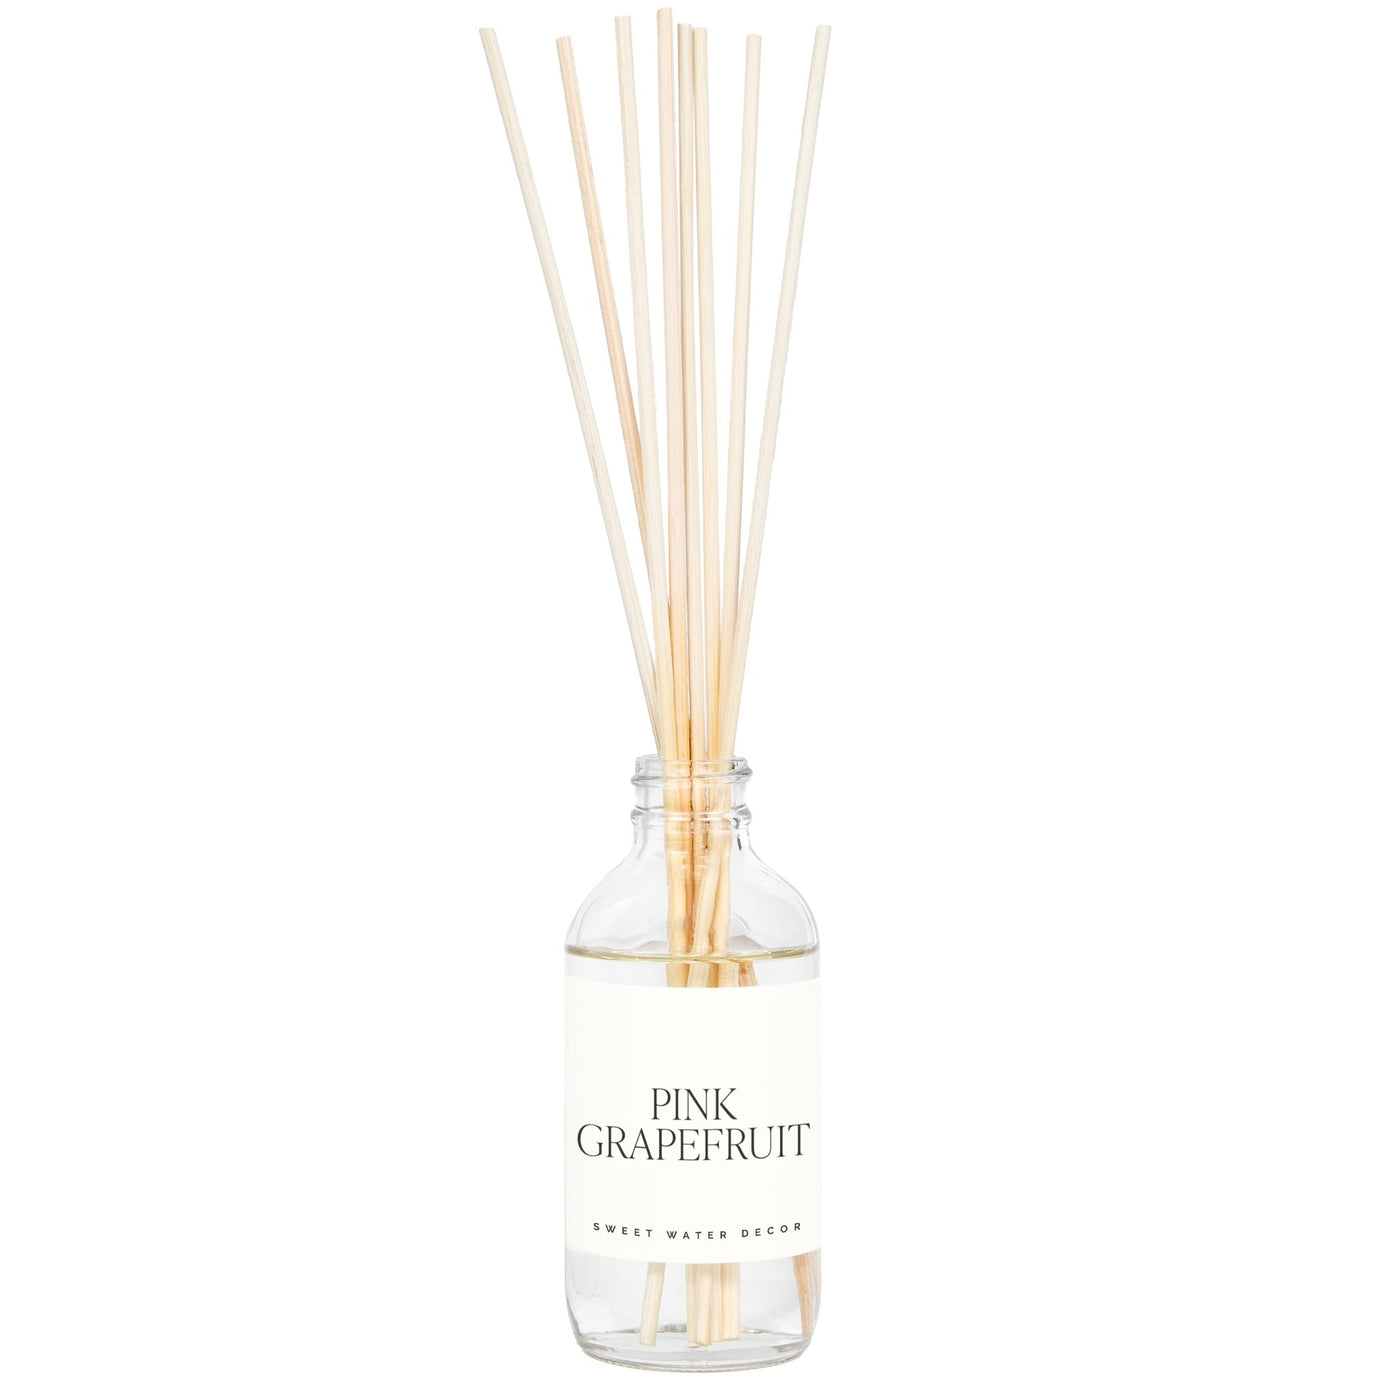 Pink Grapefruit Clear Reed Diffuser - Sweet Water Decor - Reed Diffusers